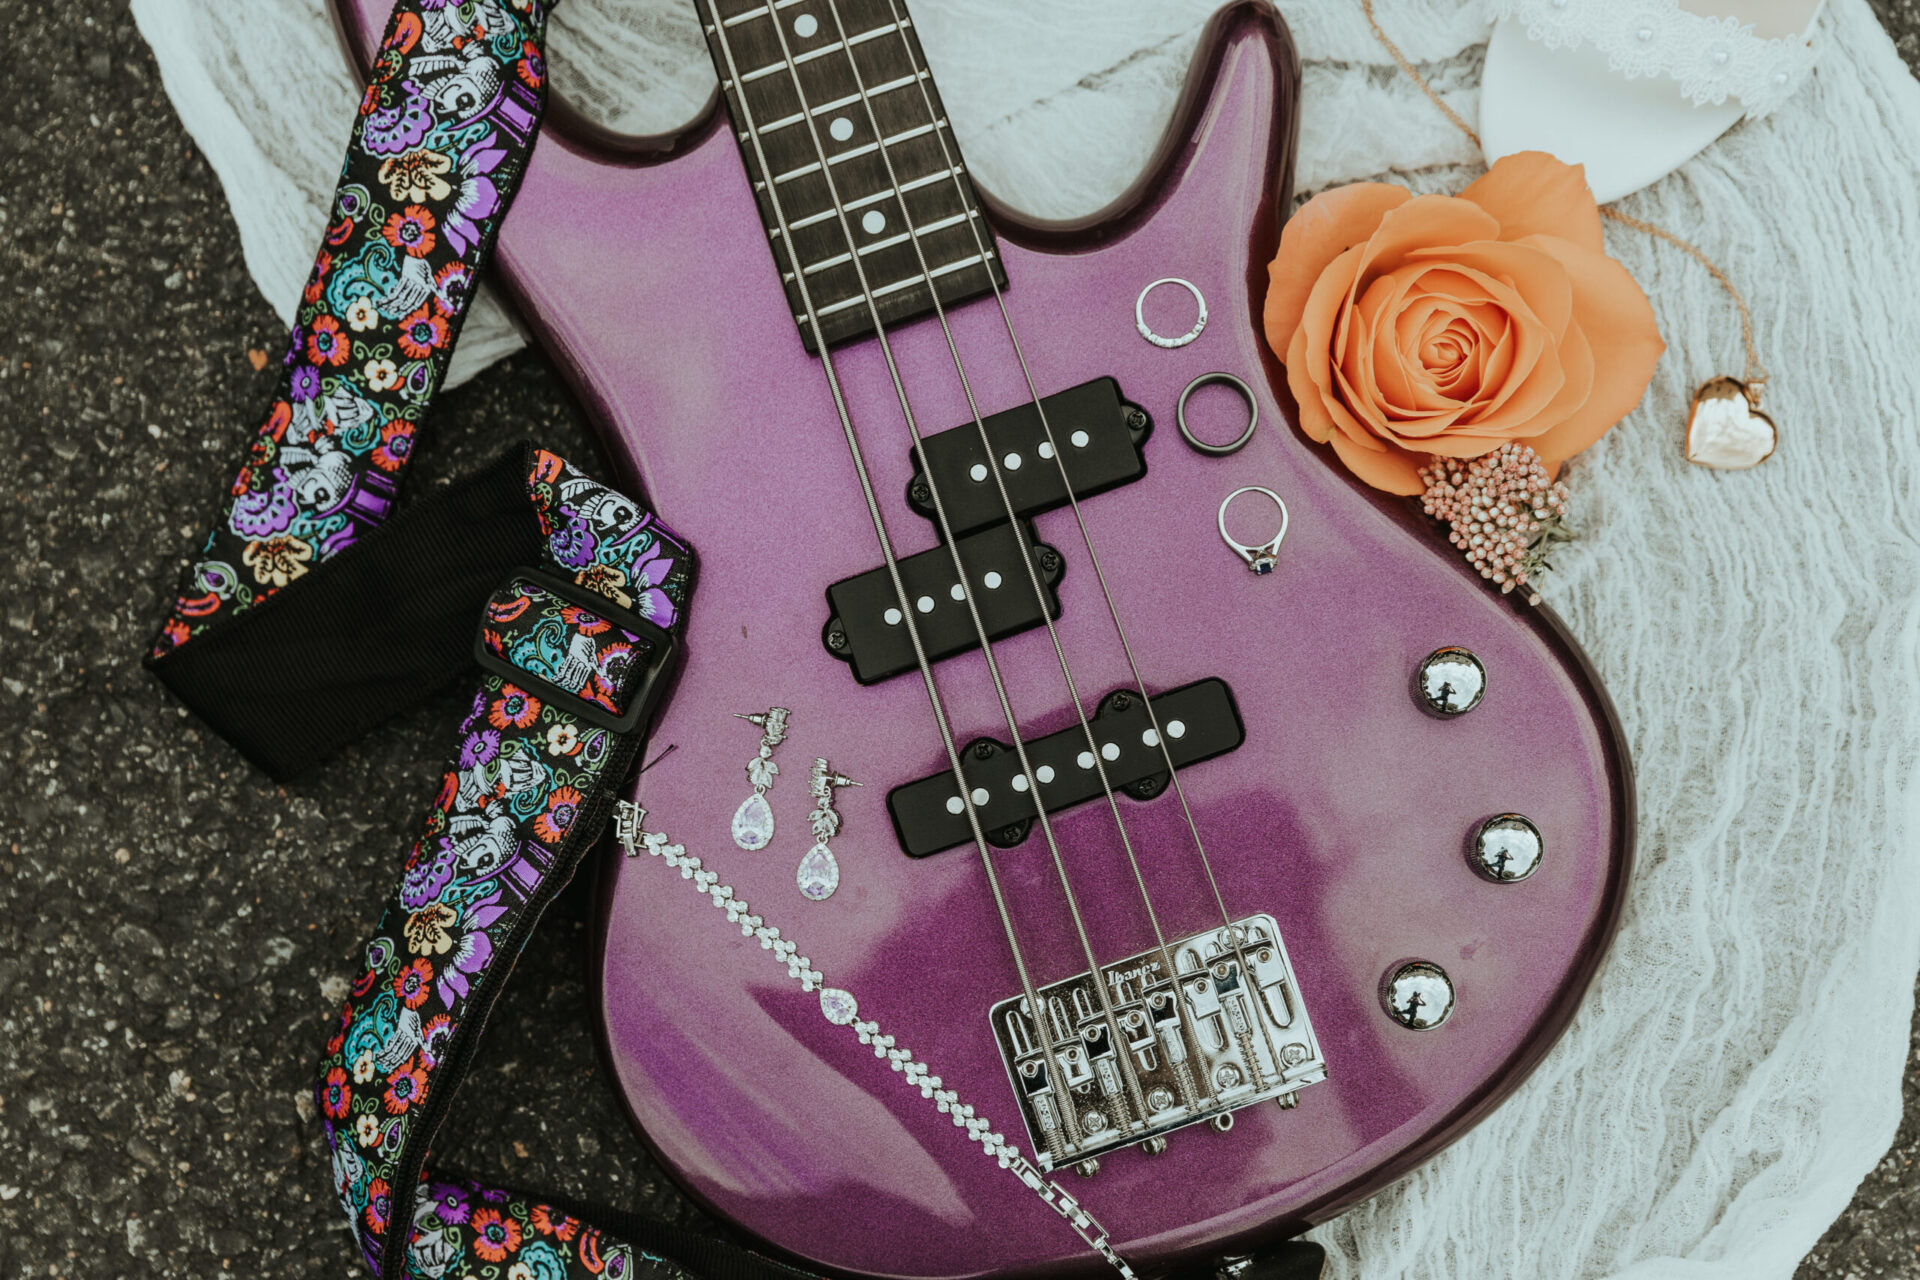 guitar with wedding rings, bride's necklace, bracelet and earrings with orange rose